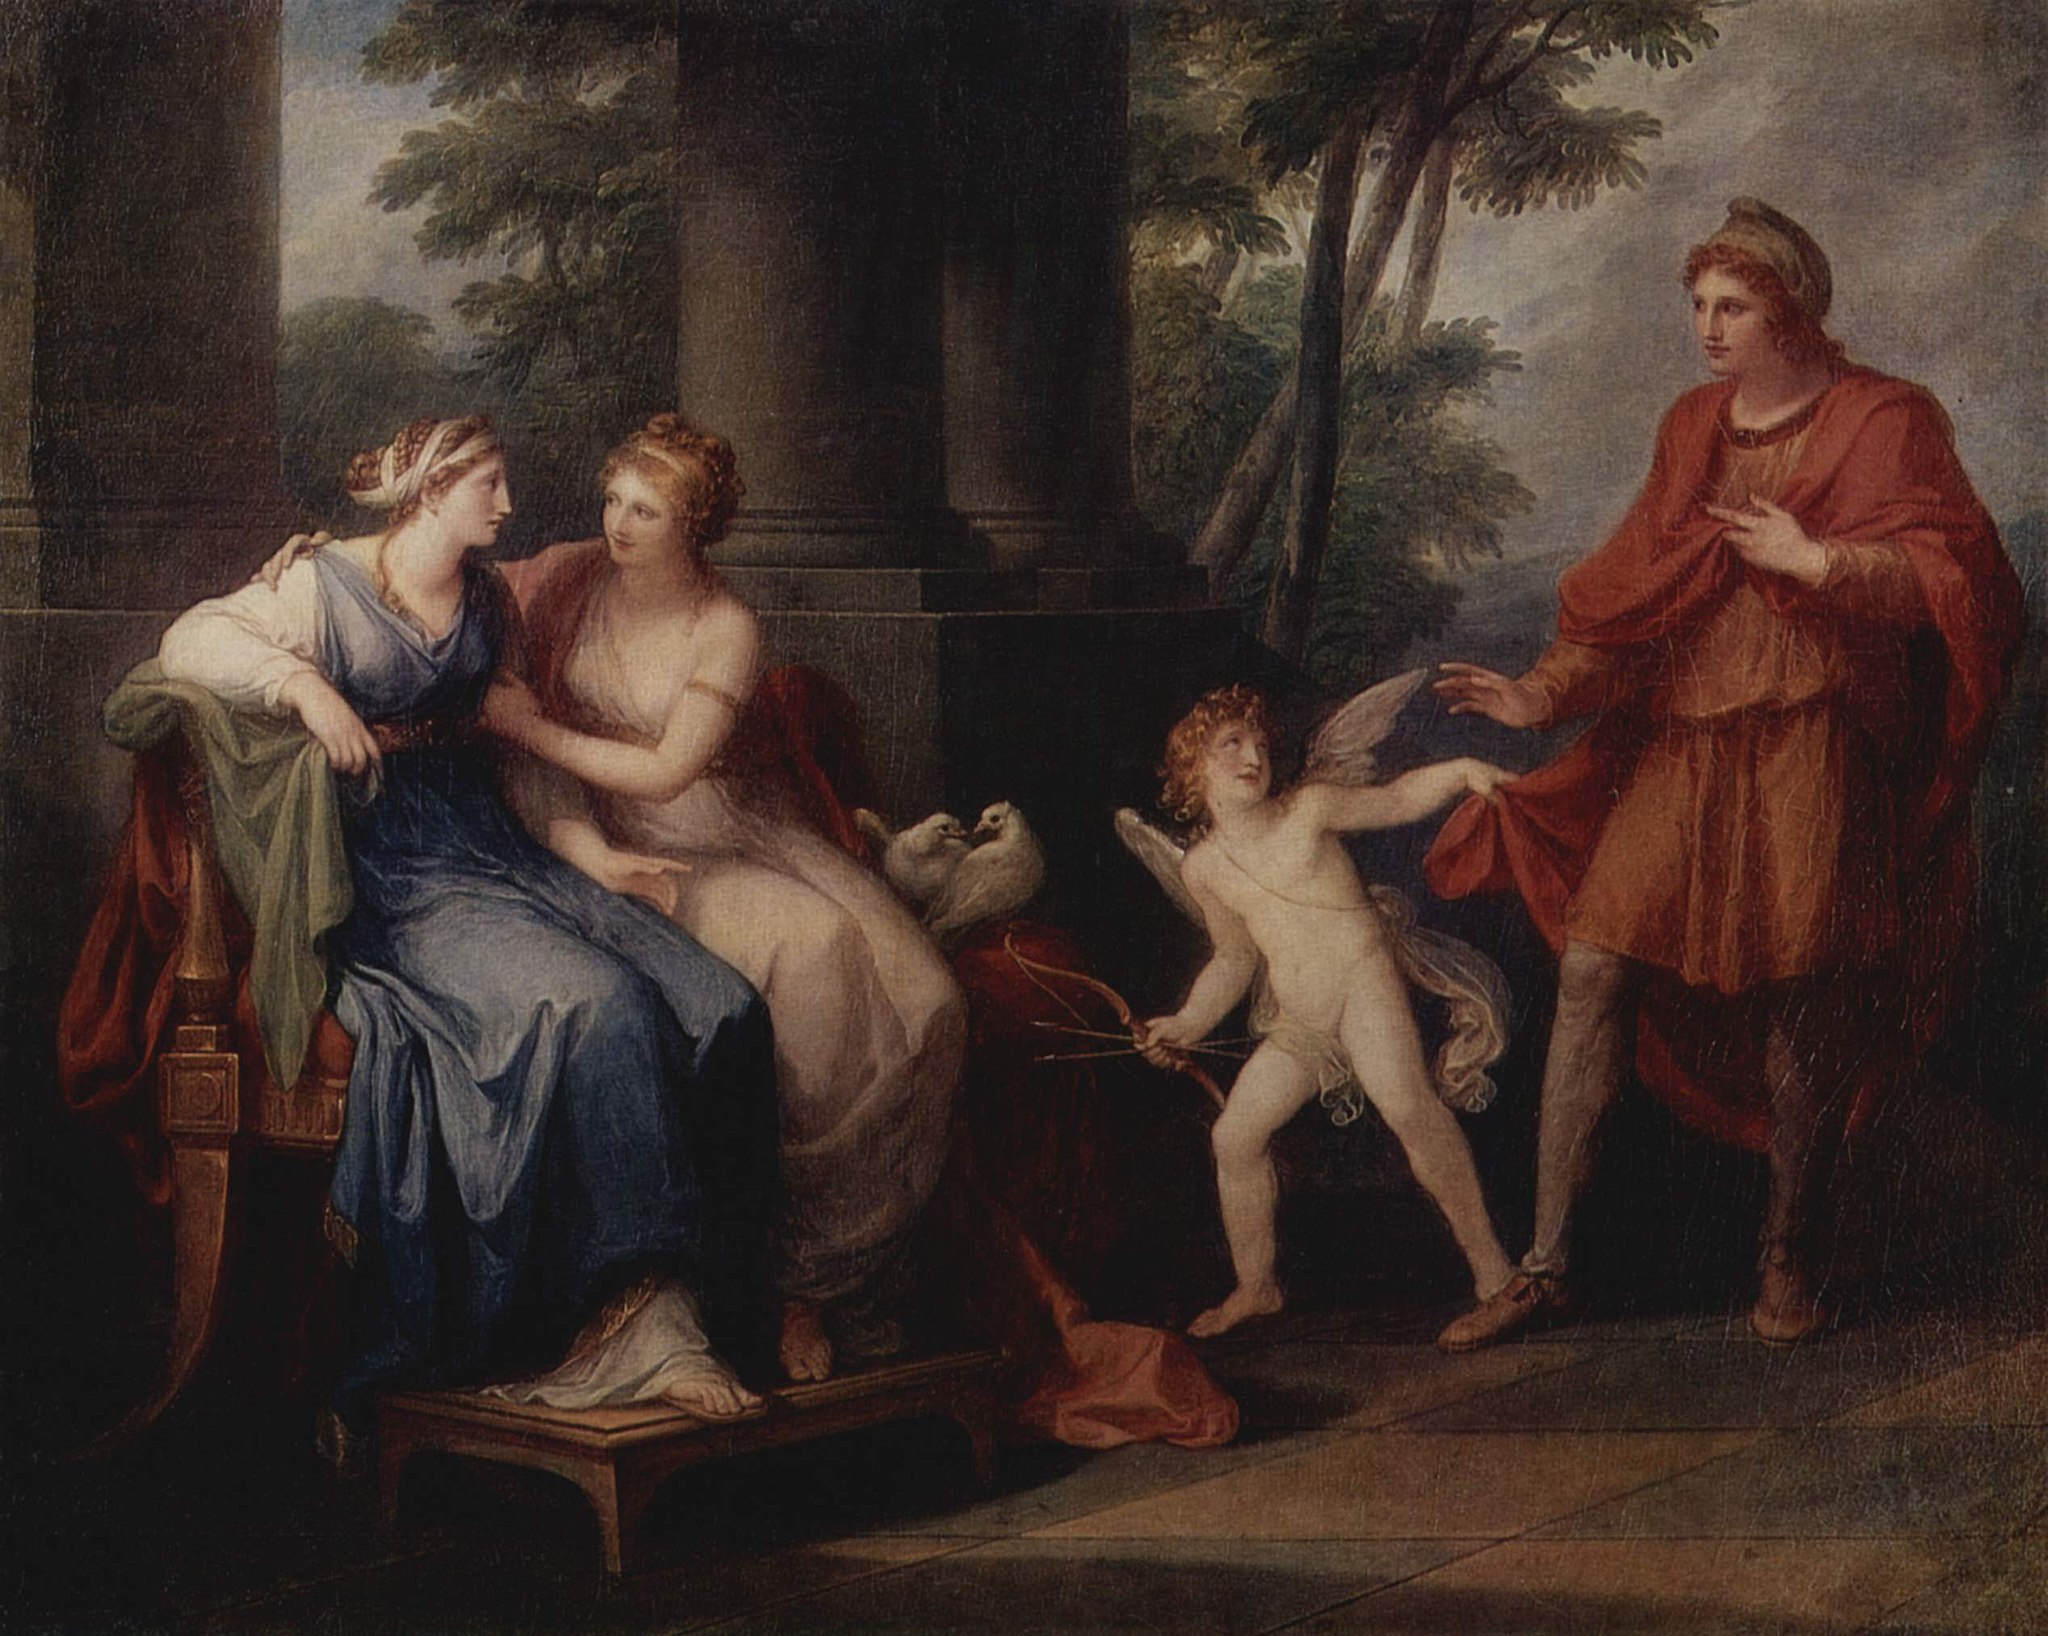 A painting of scene with three people and a cherub. One person (pictured on the right) is being guided toward two women by a cherub. The two women (pictured on the left) are comforting one another.